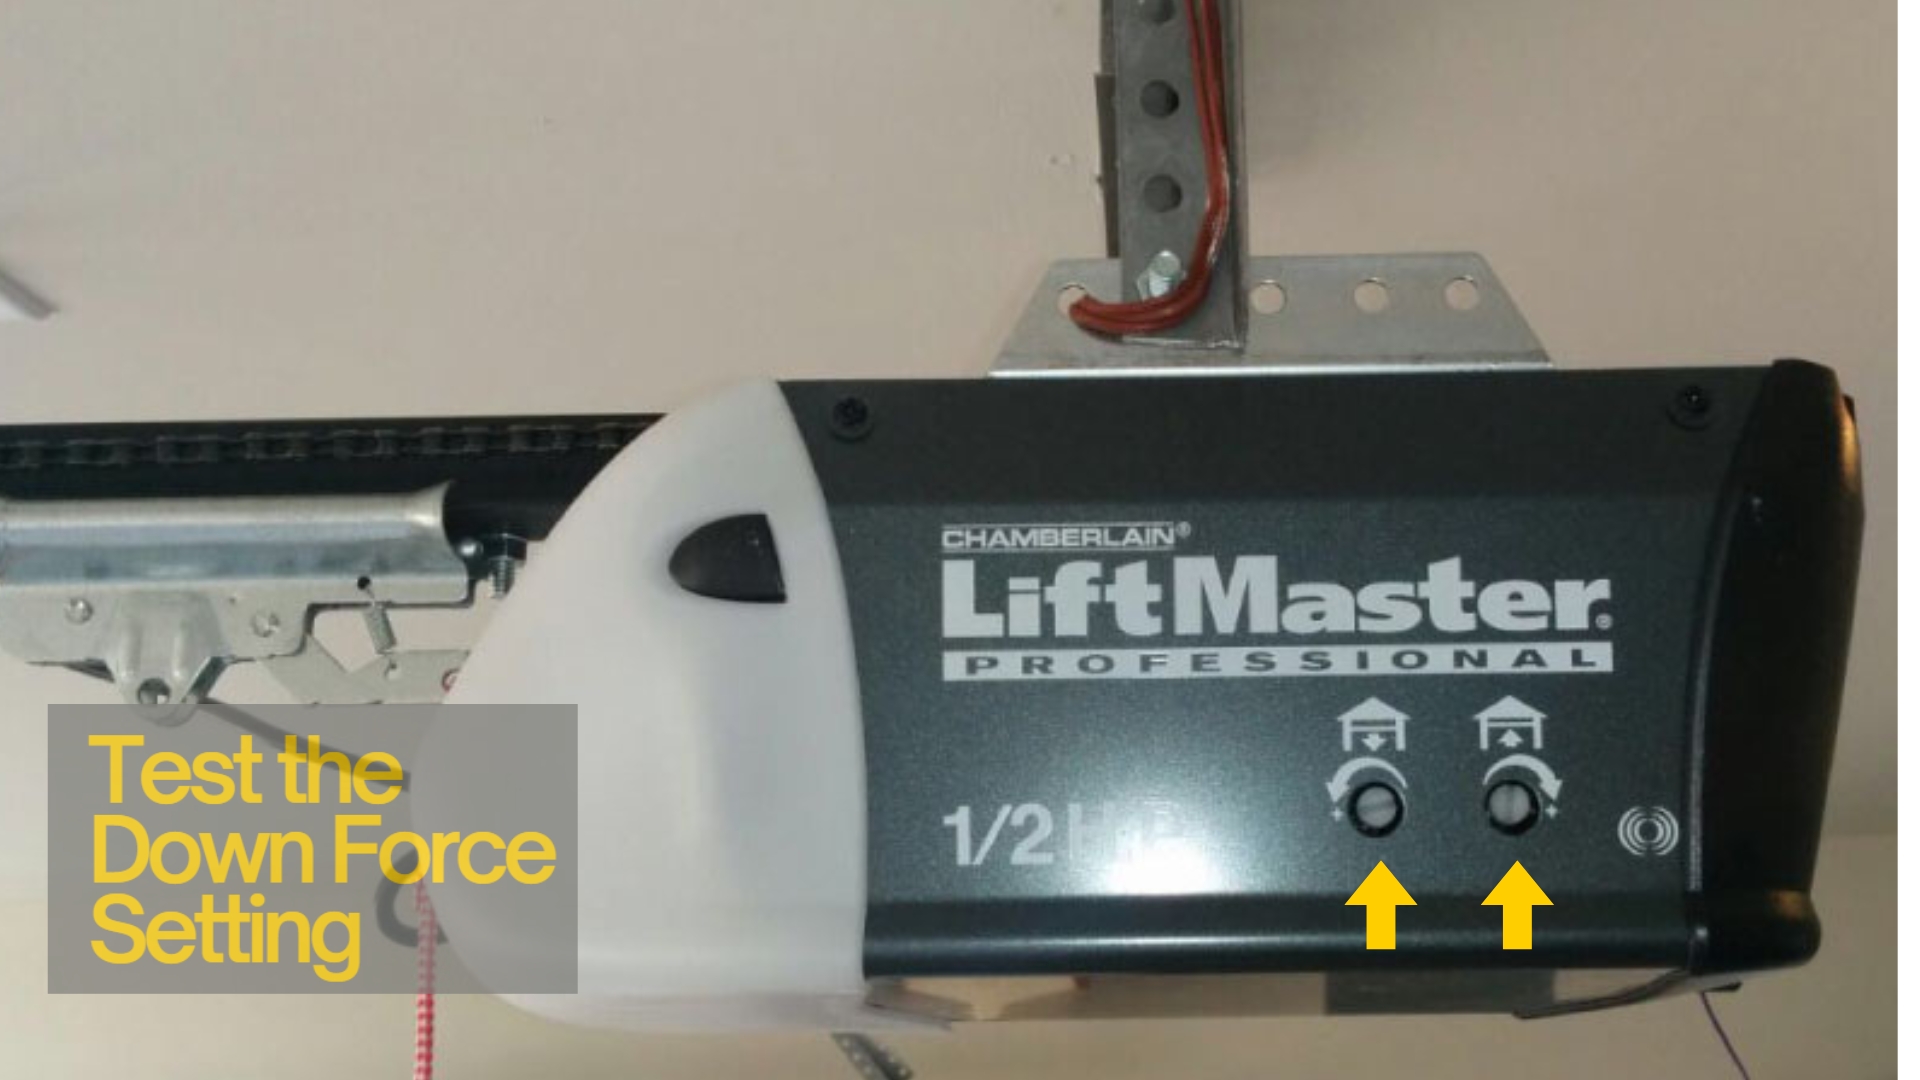 A garage door opener inspection includes testing the down force setting